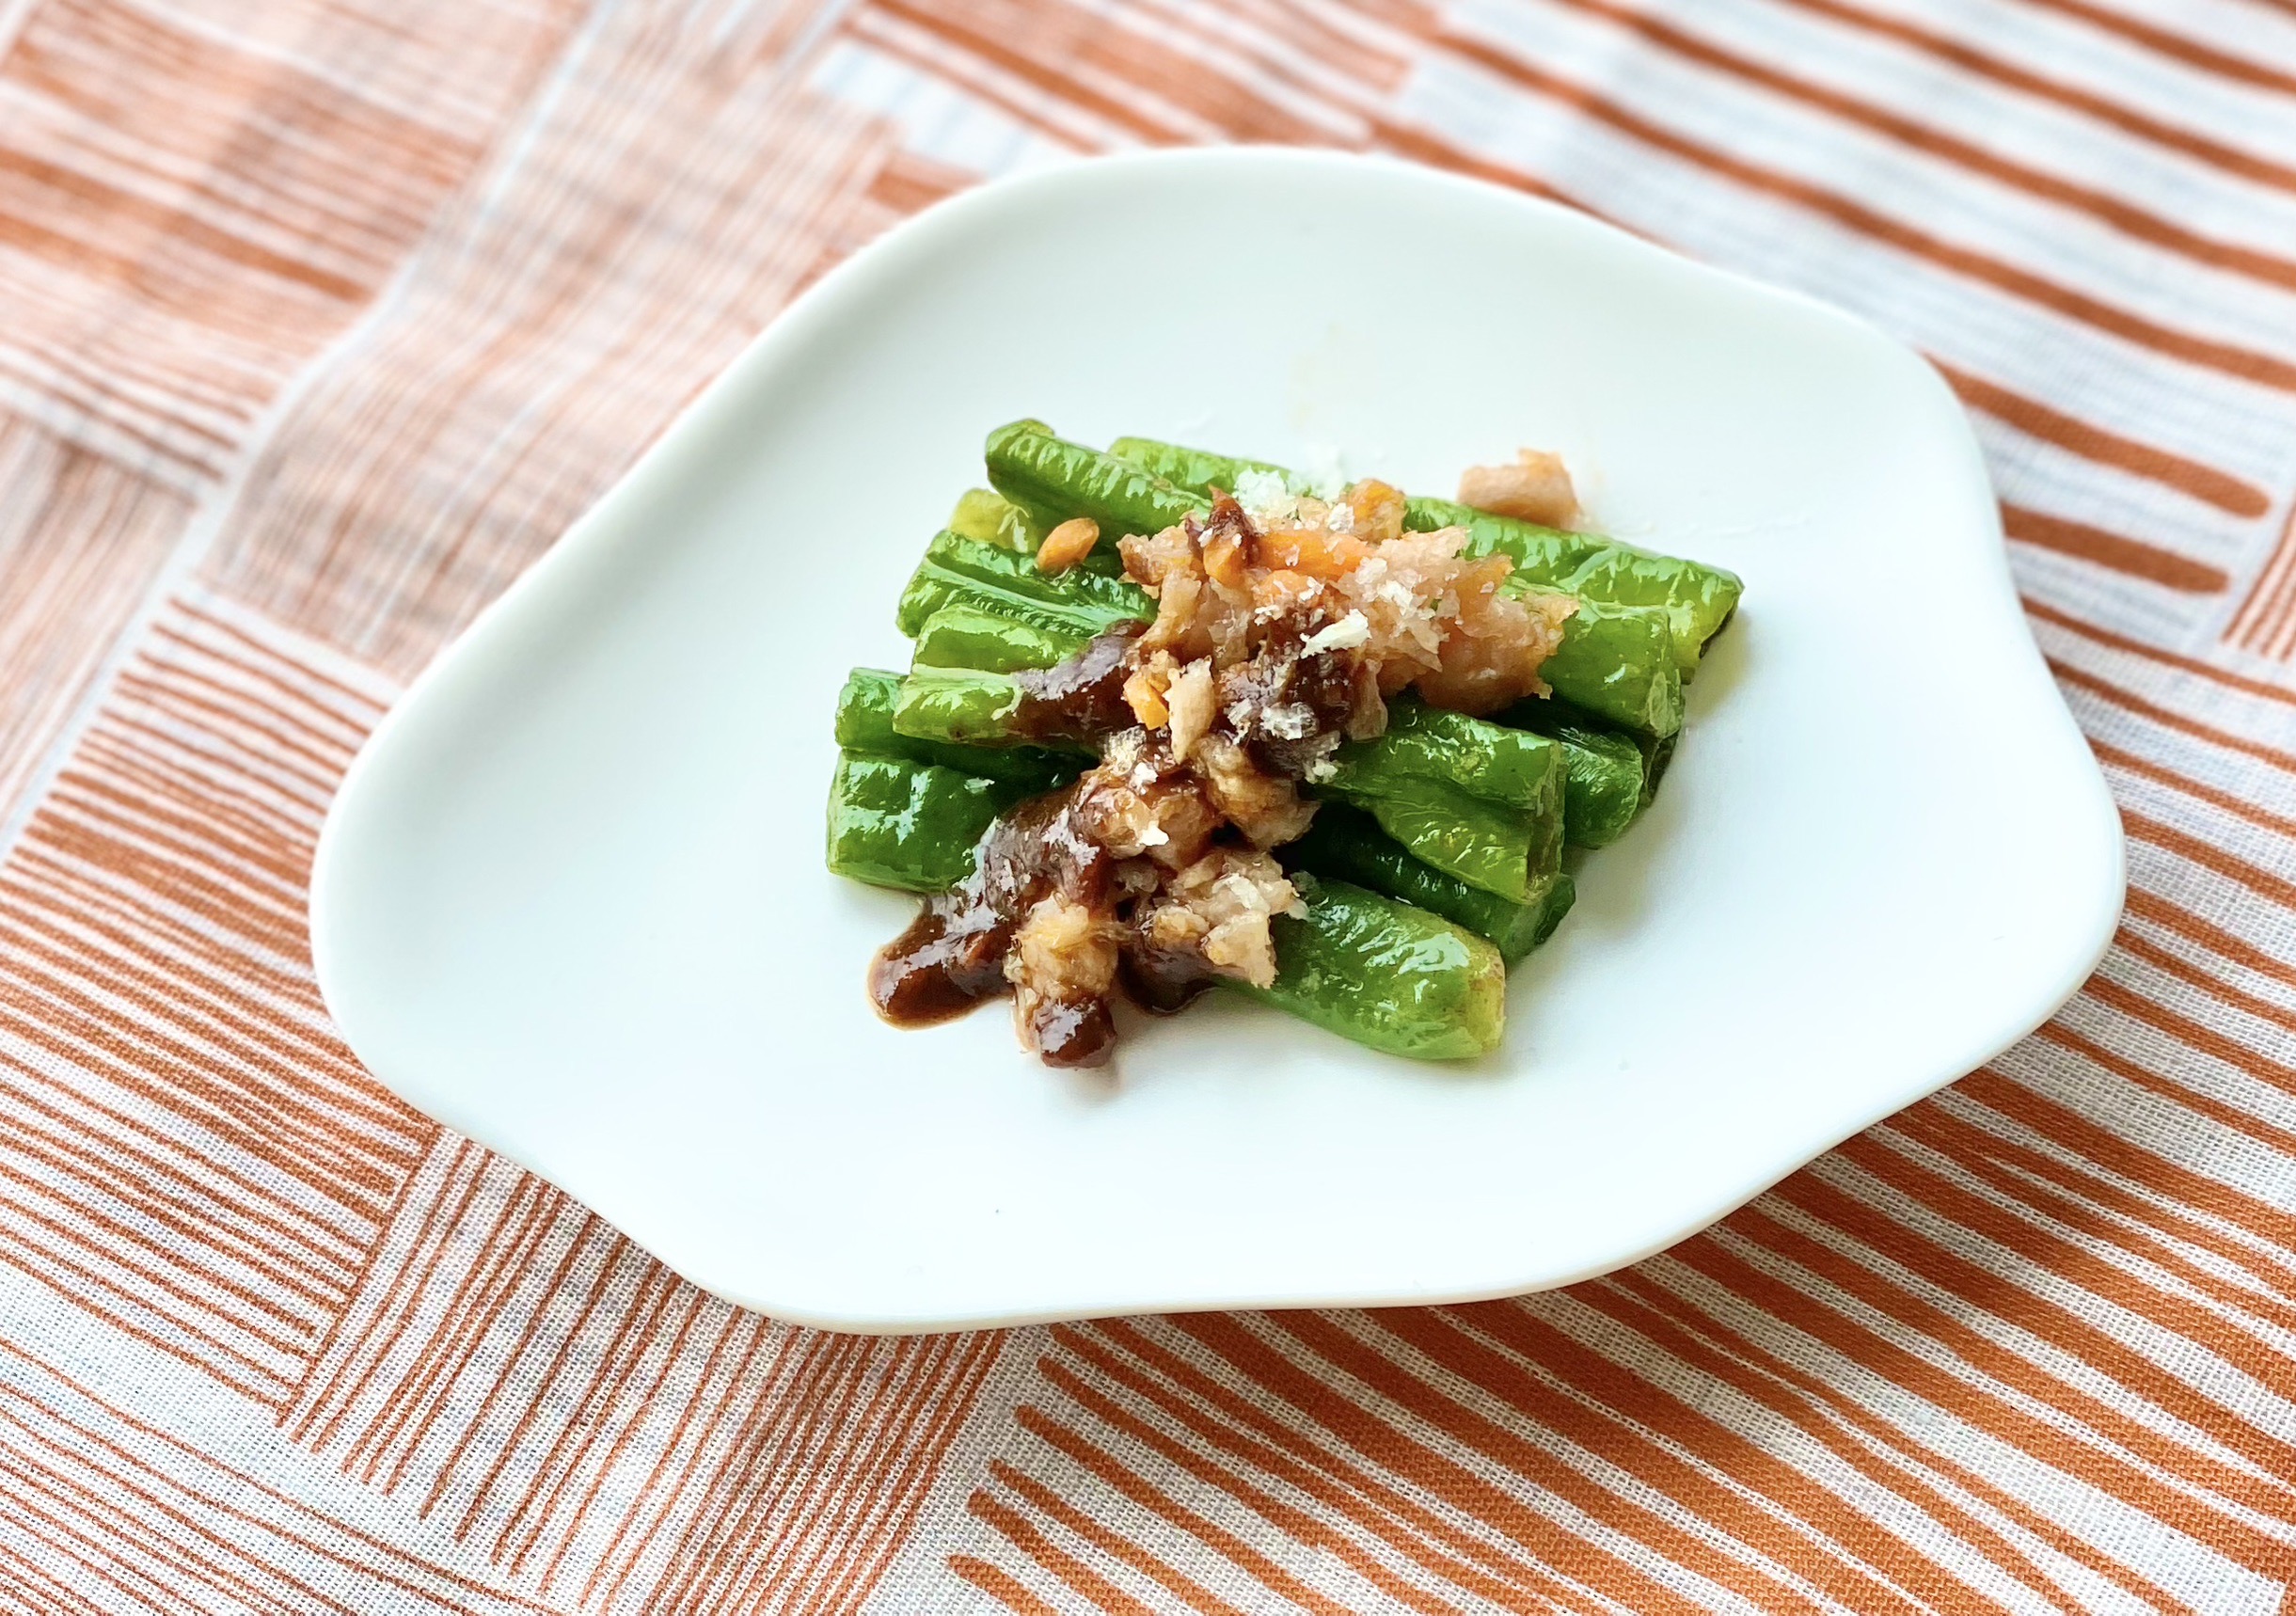 Vegan minced meats and green bean with chili sauce